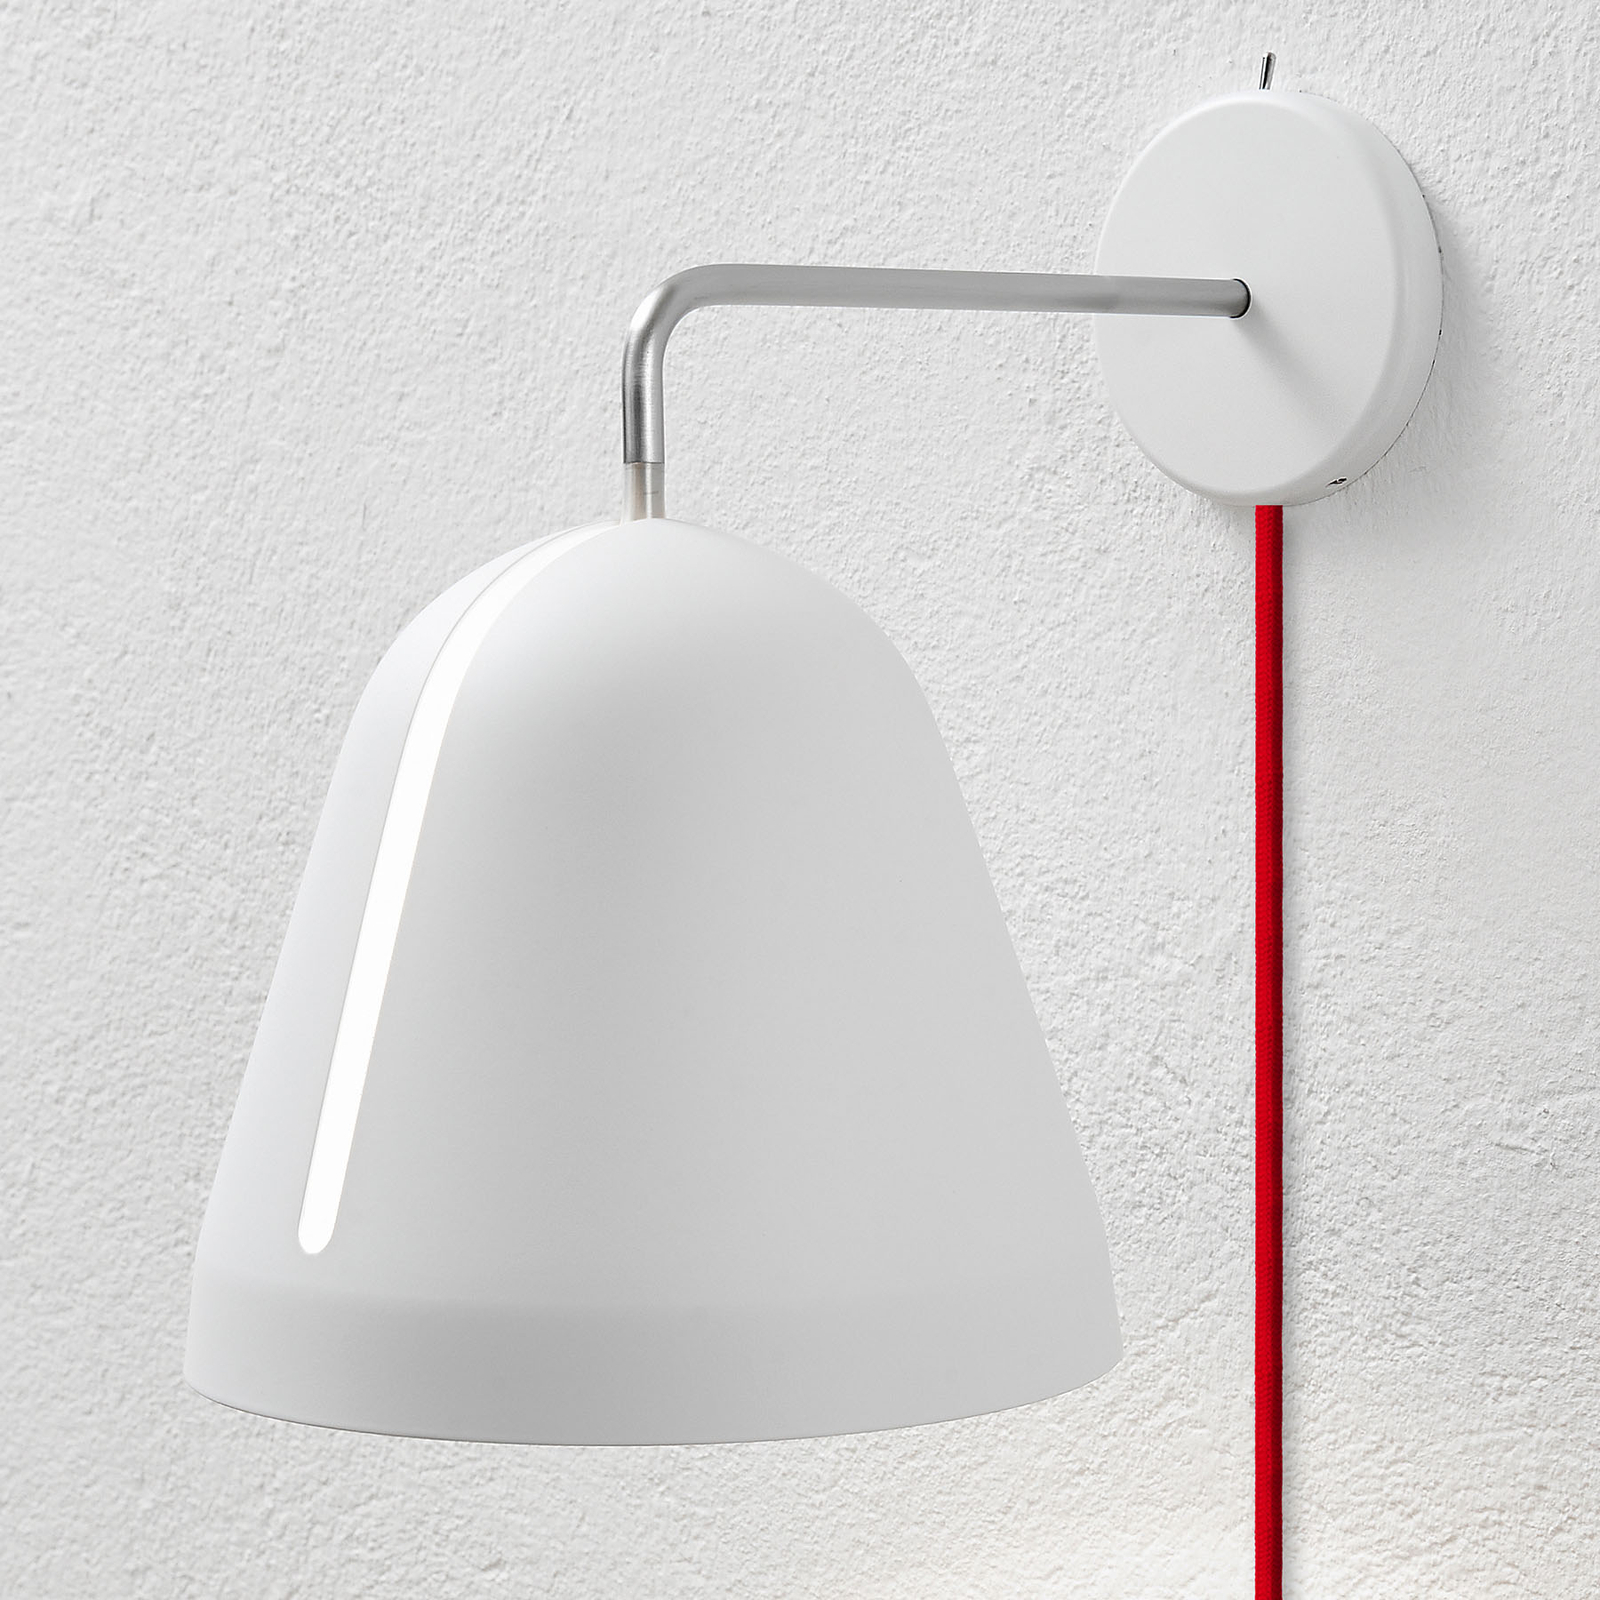 Nyta Tilt Wall wall light with a red cable, white